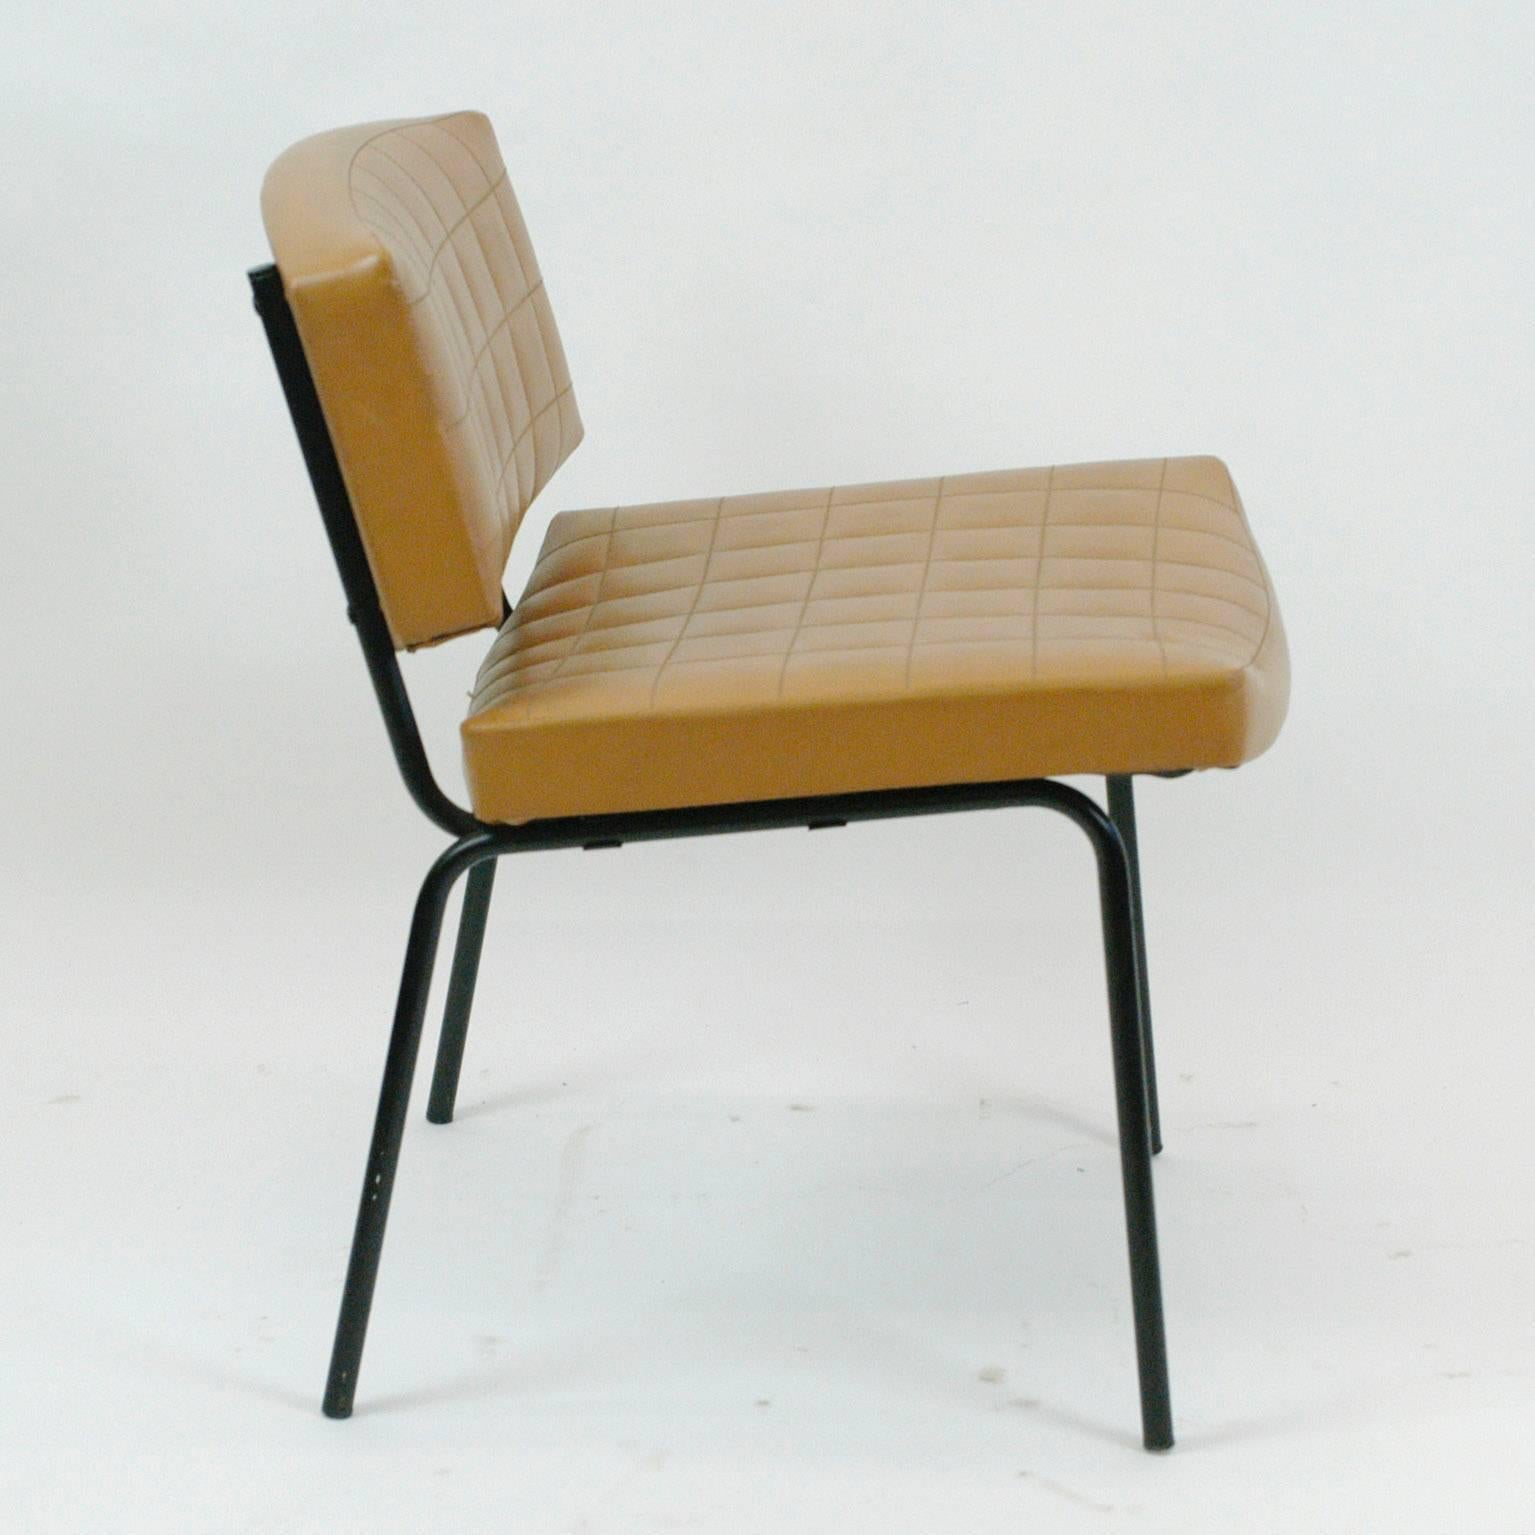 Belgian Set of Three Cognac Midcentury Chairs Designed by Pierre Guariche for Meurop